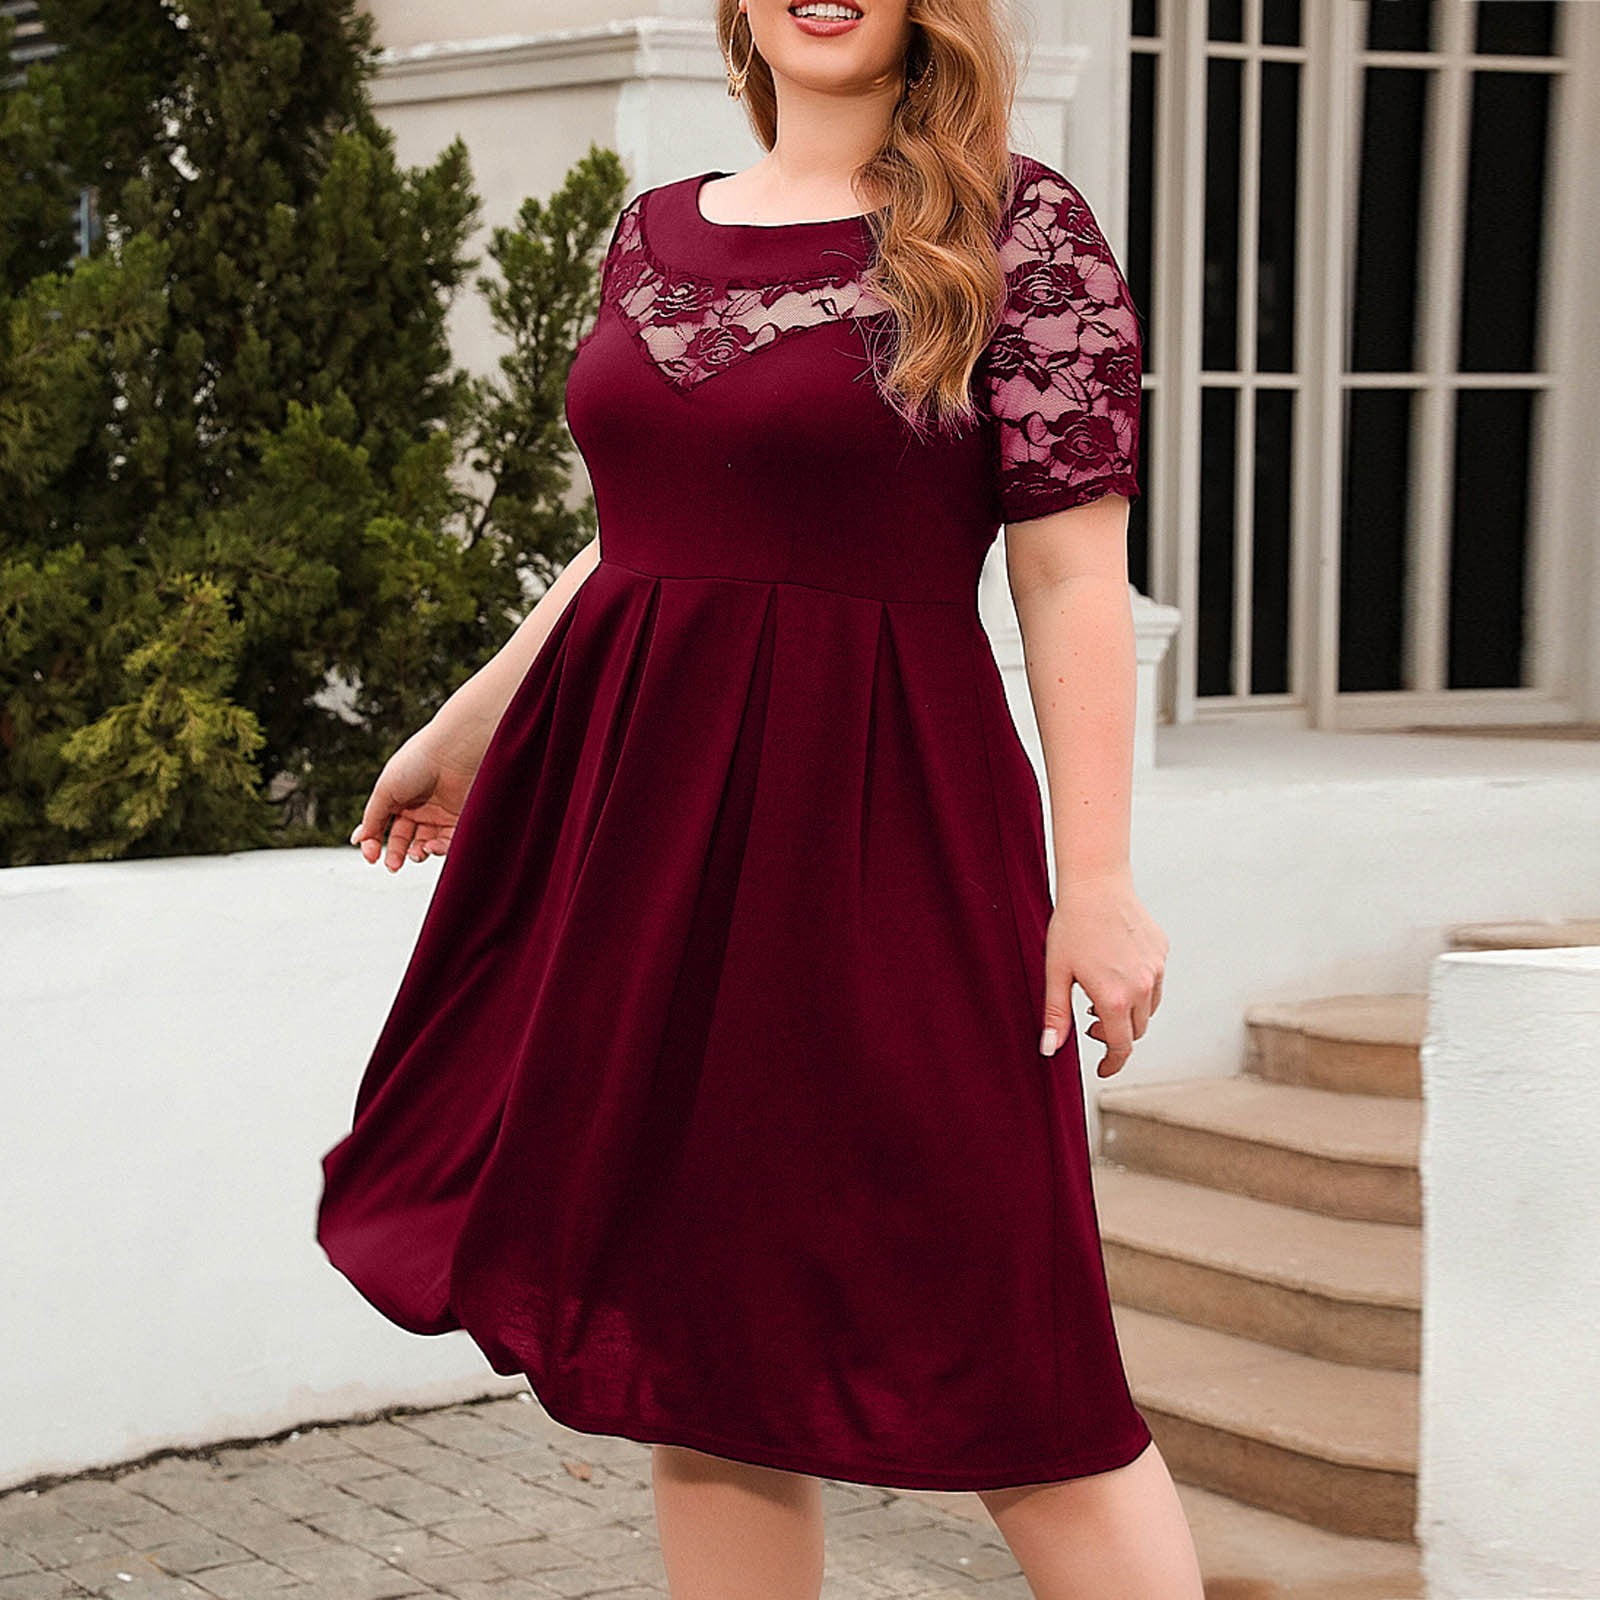 plus size formal dresses for weddings